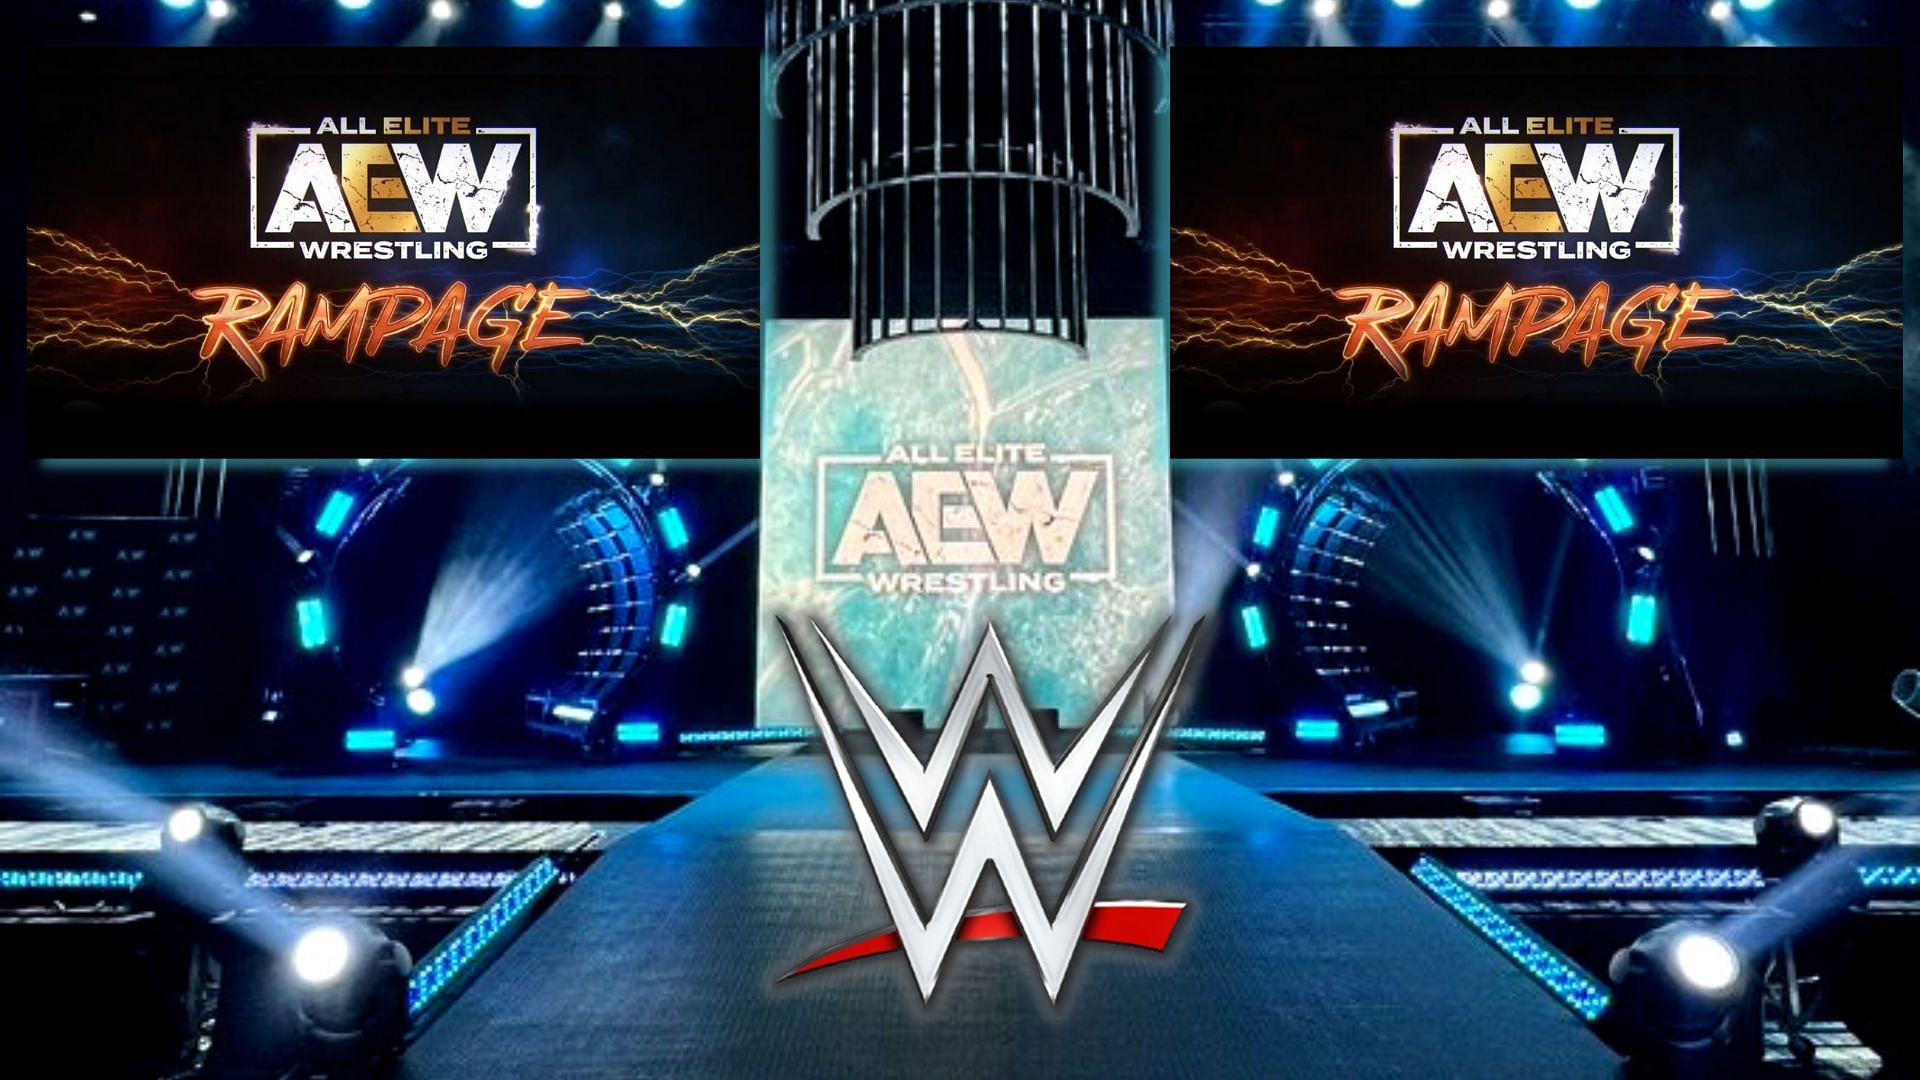 AEW Rampage is set to air in a few hours